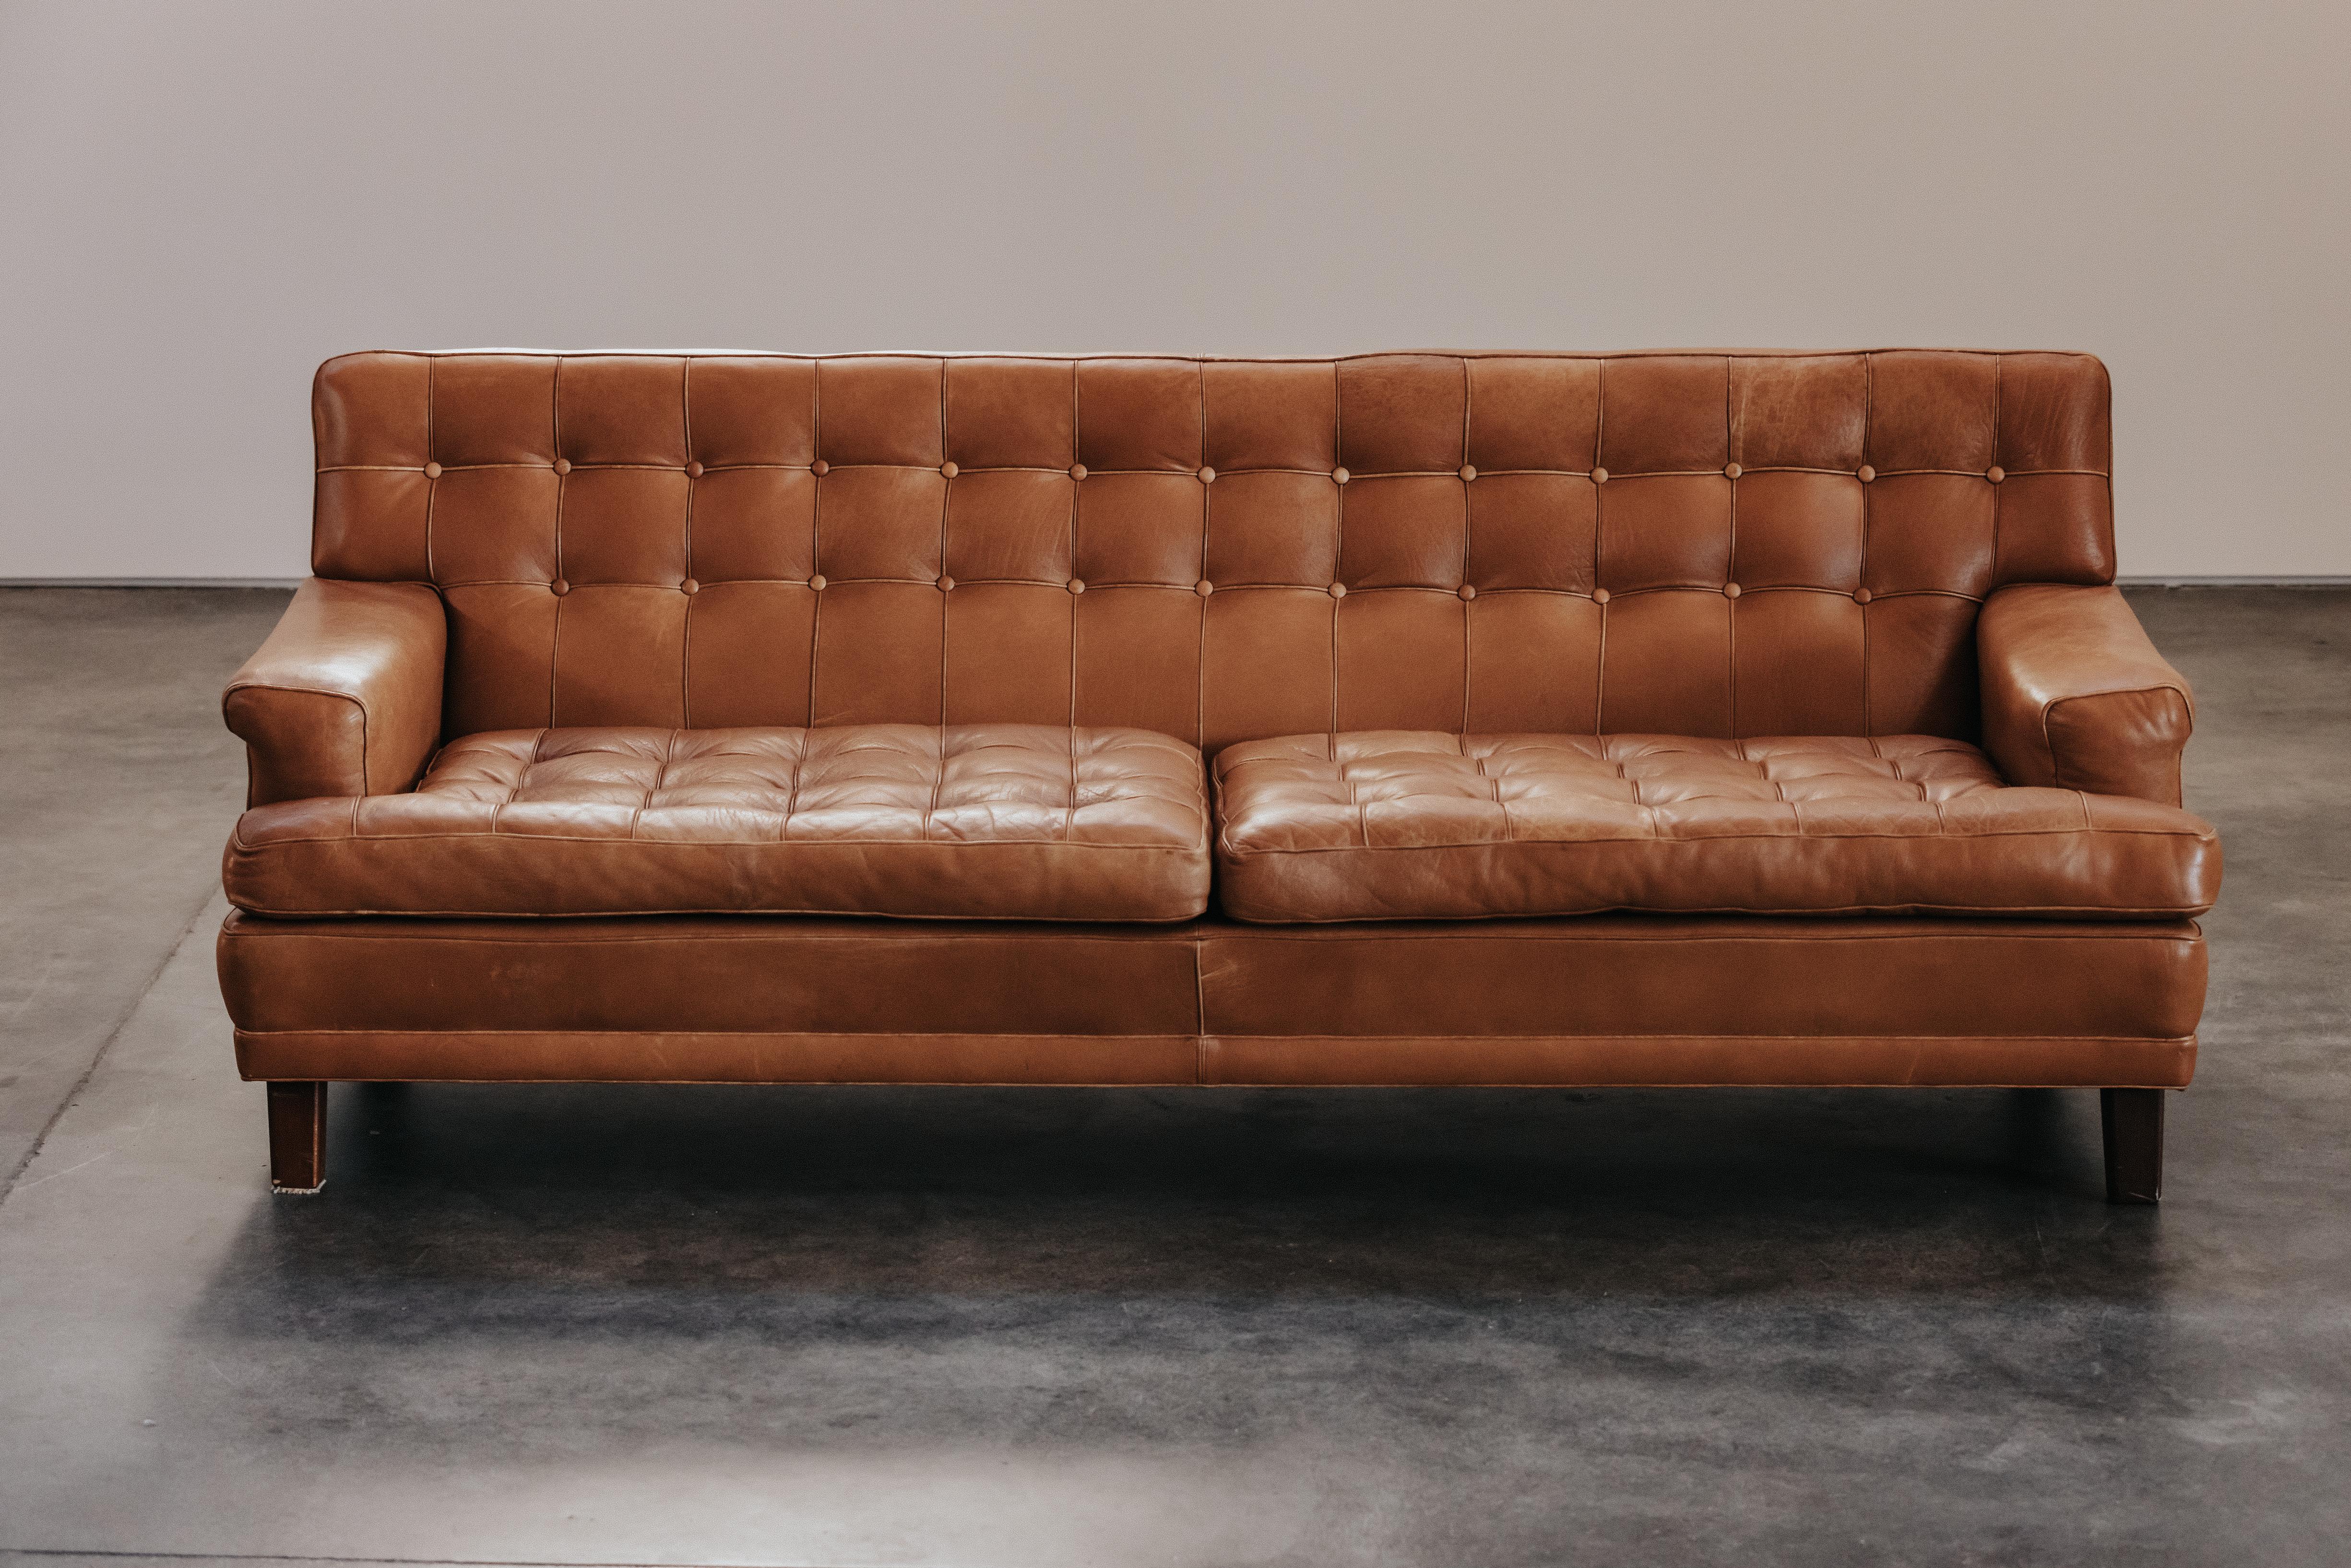 Vintage Arne Norell Leather Sofa, Model Merker, From Sweden Circa 1970.  Original cognac leather upholstery with nice patina and use.